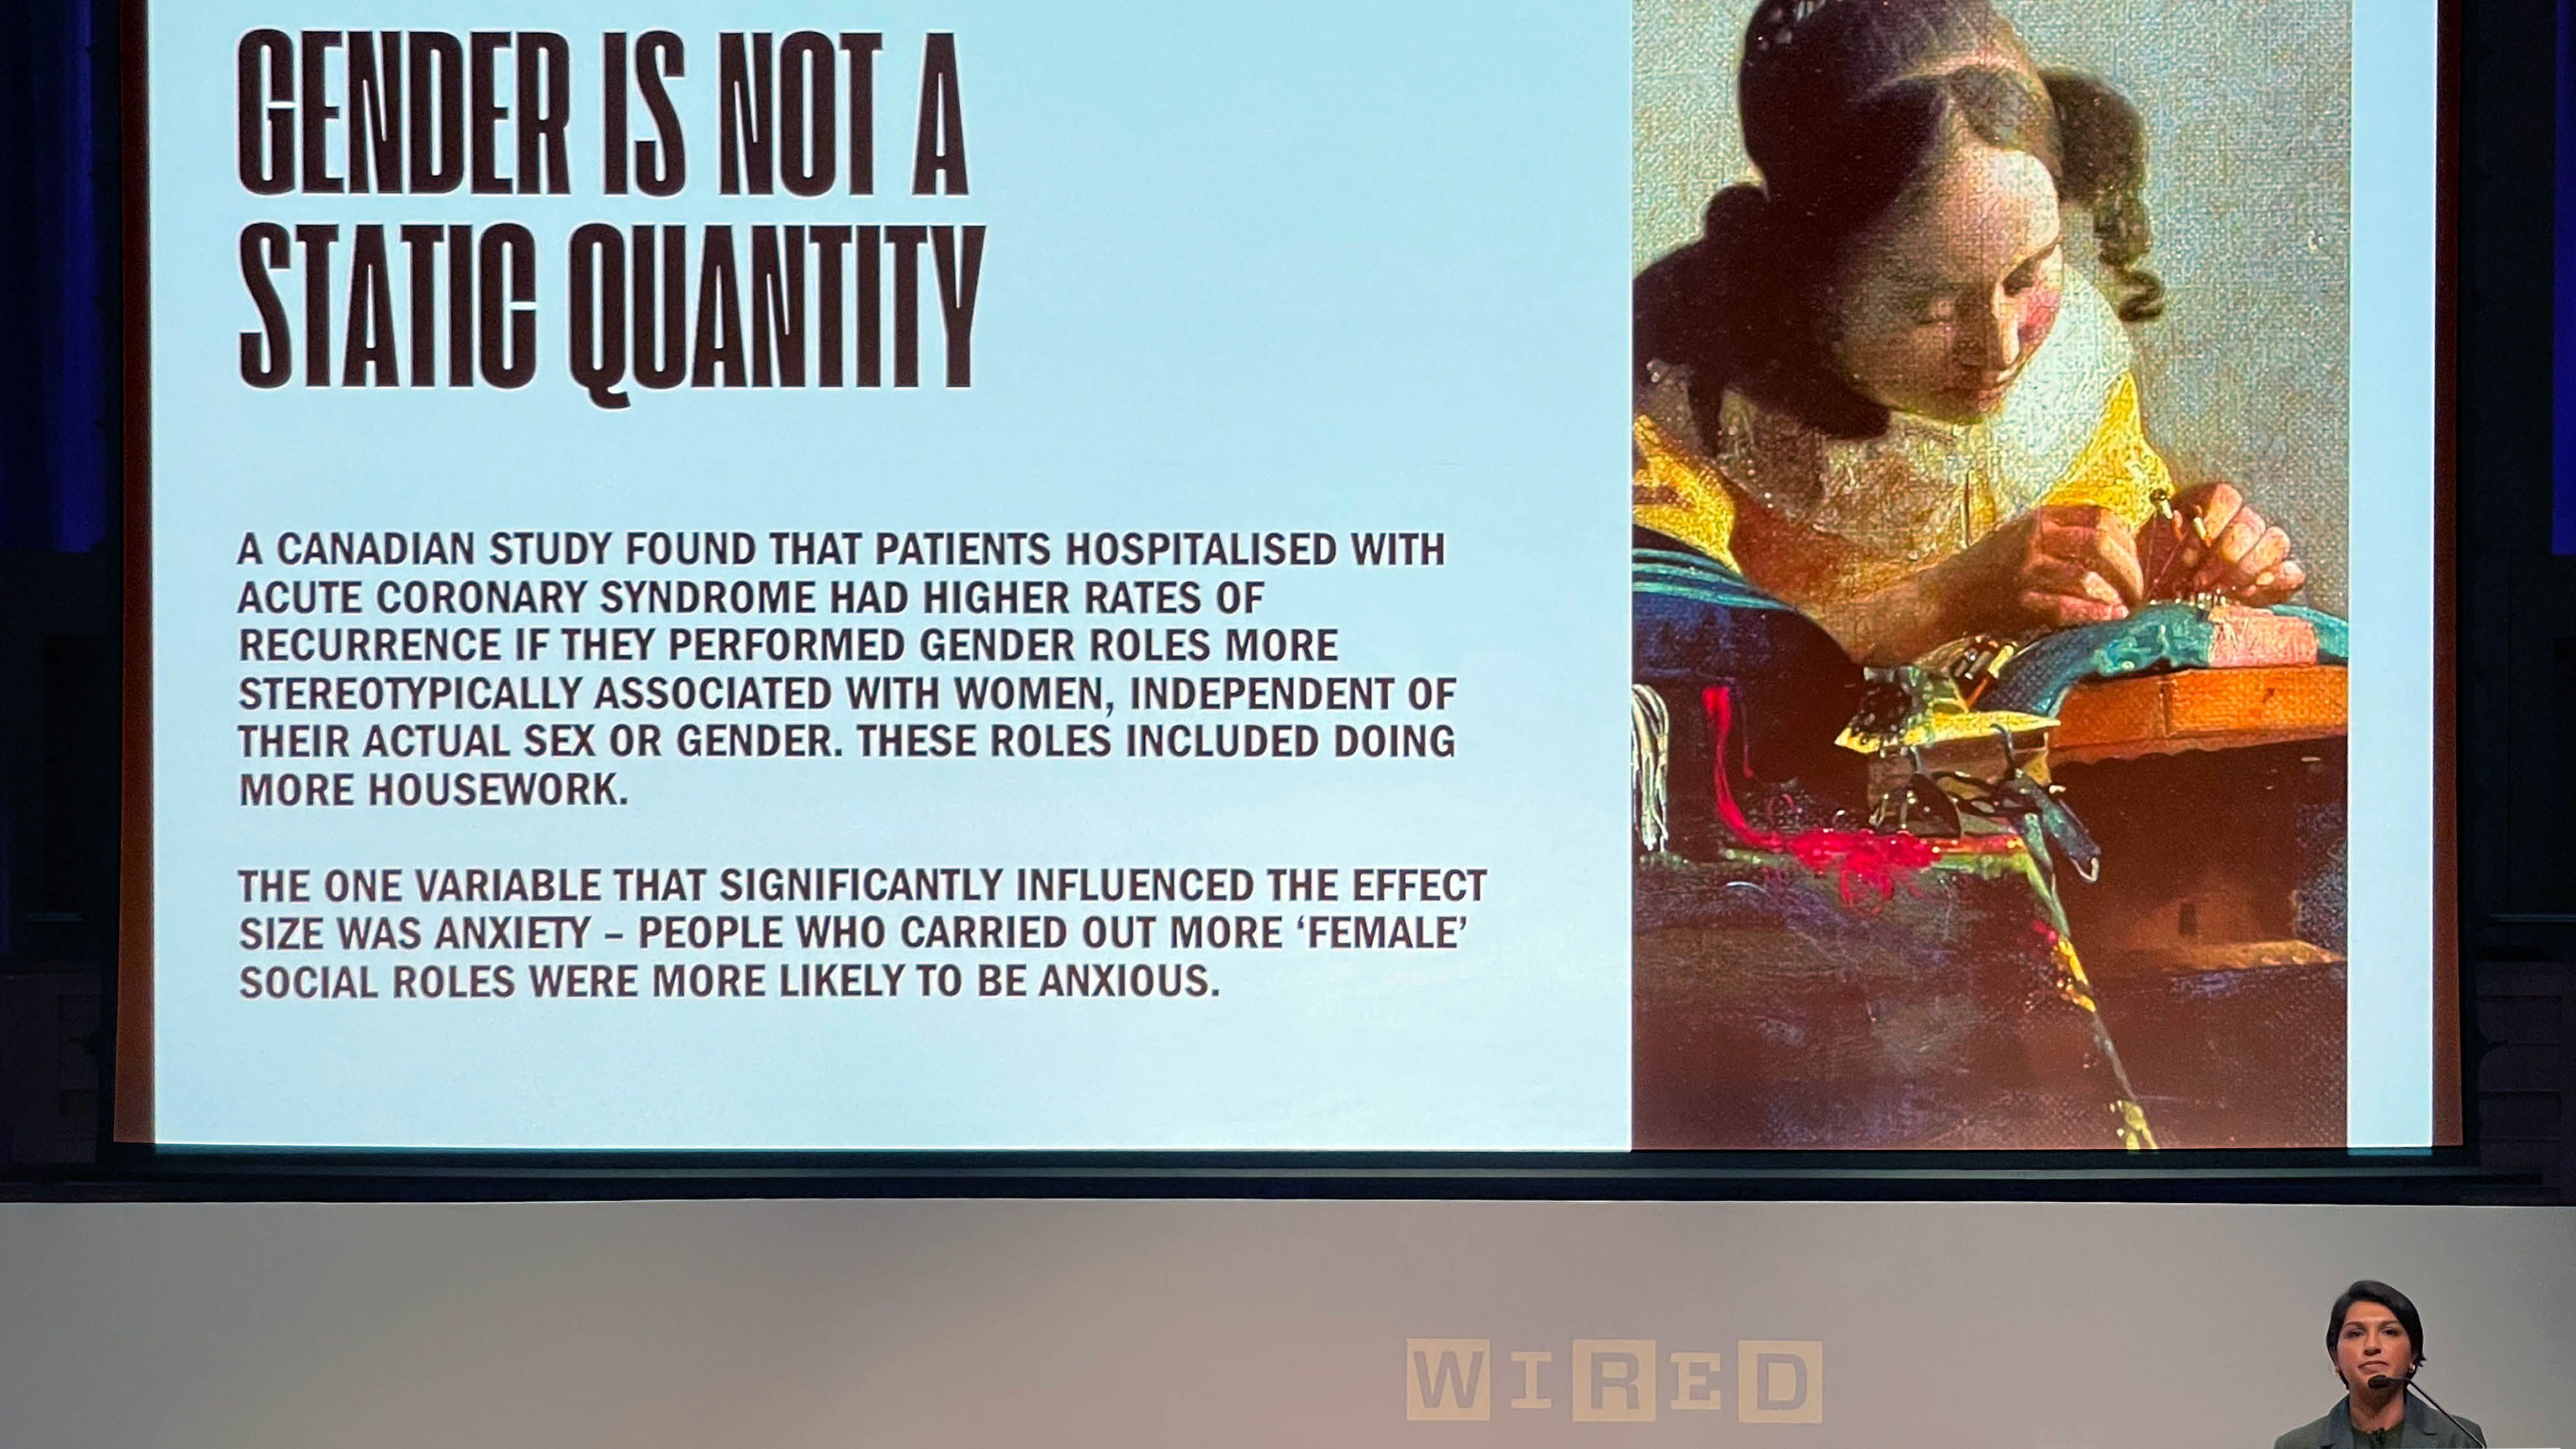 'Gender is not a static quantity' slide on screen